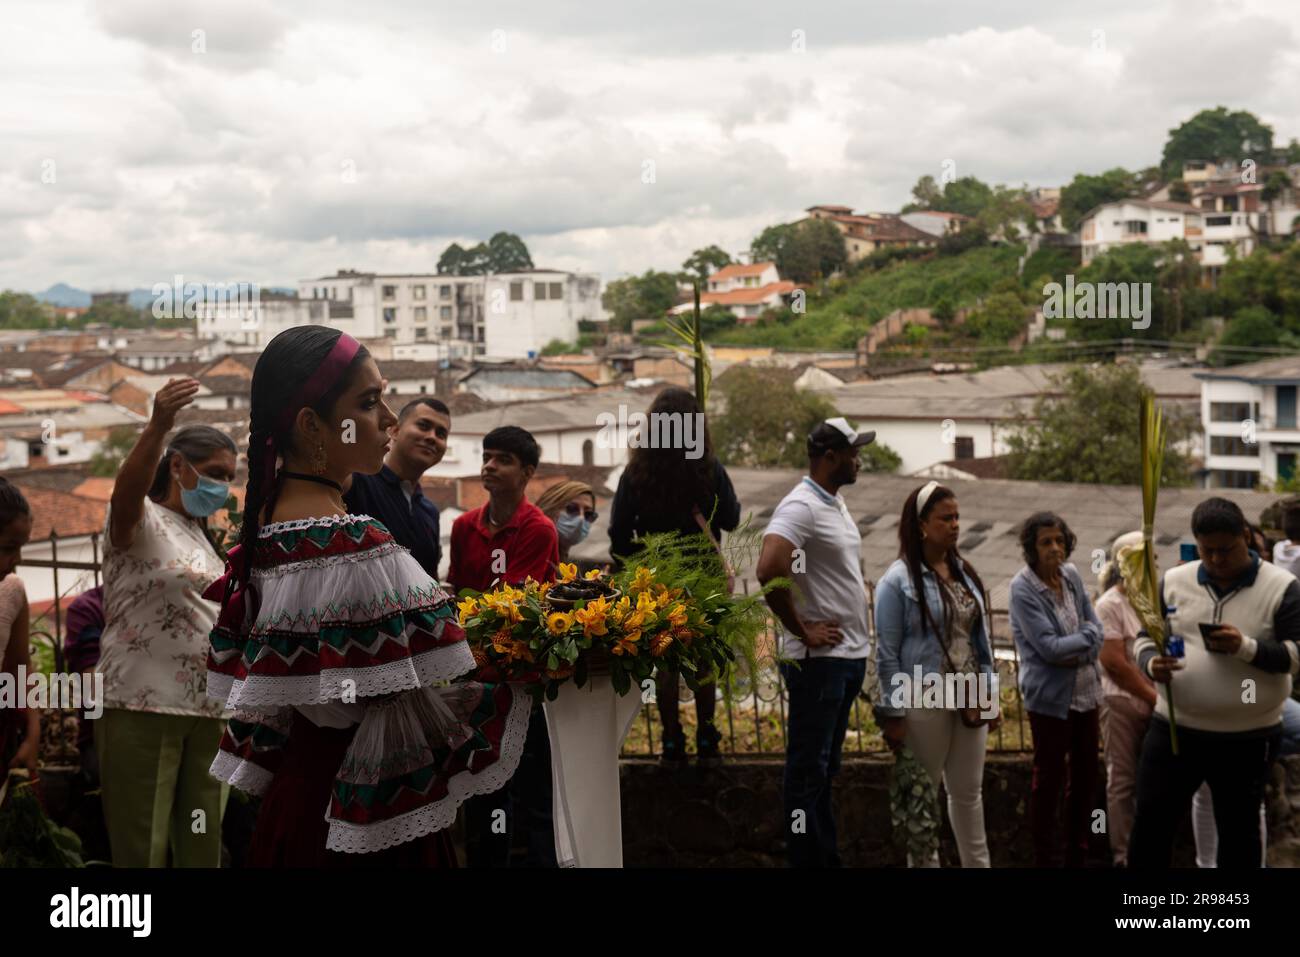 A group of people dressed in traditional attire participating in a religious procession on Domingo de Ramos in the city of Popayan, Colombia Stock Photo